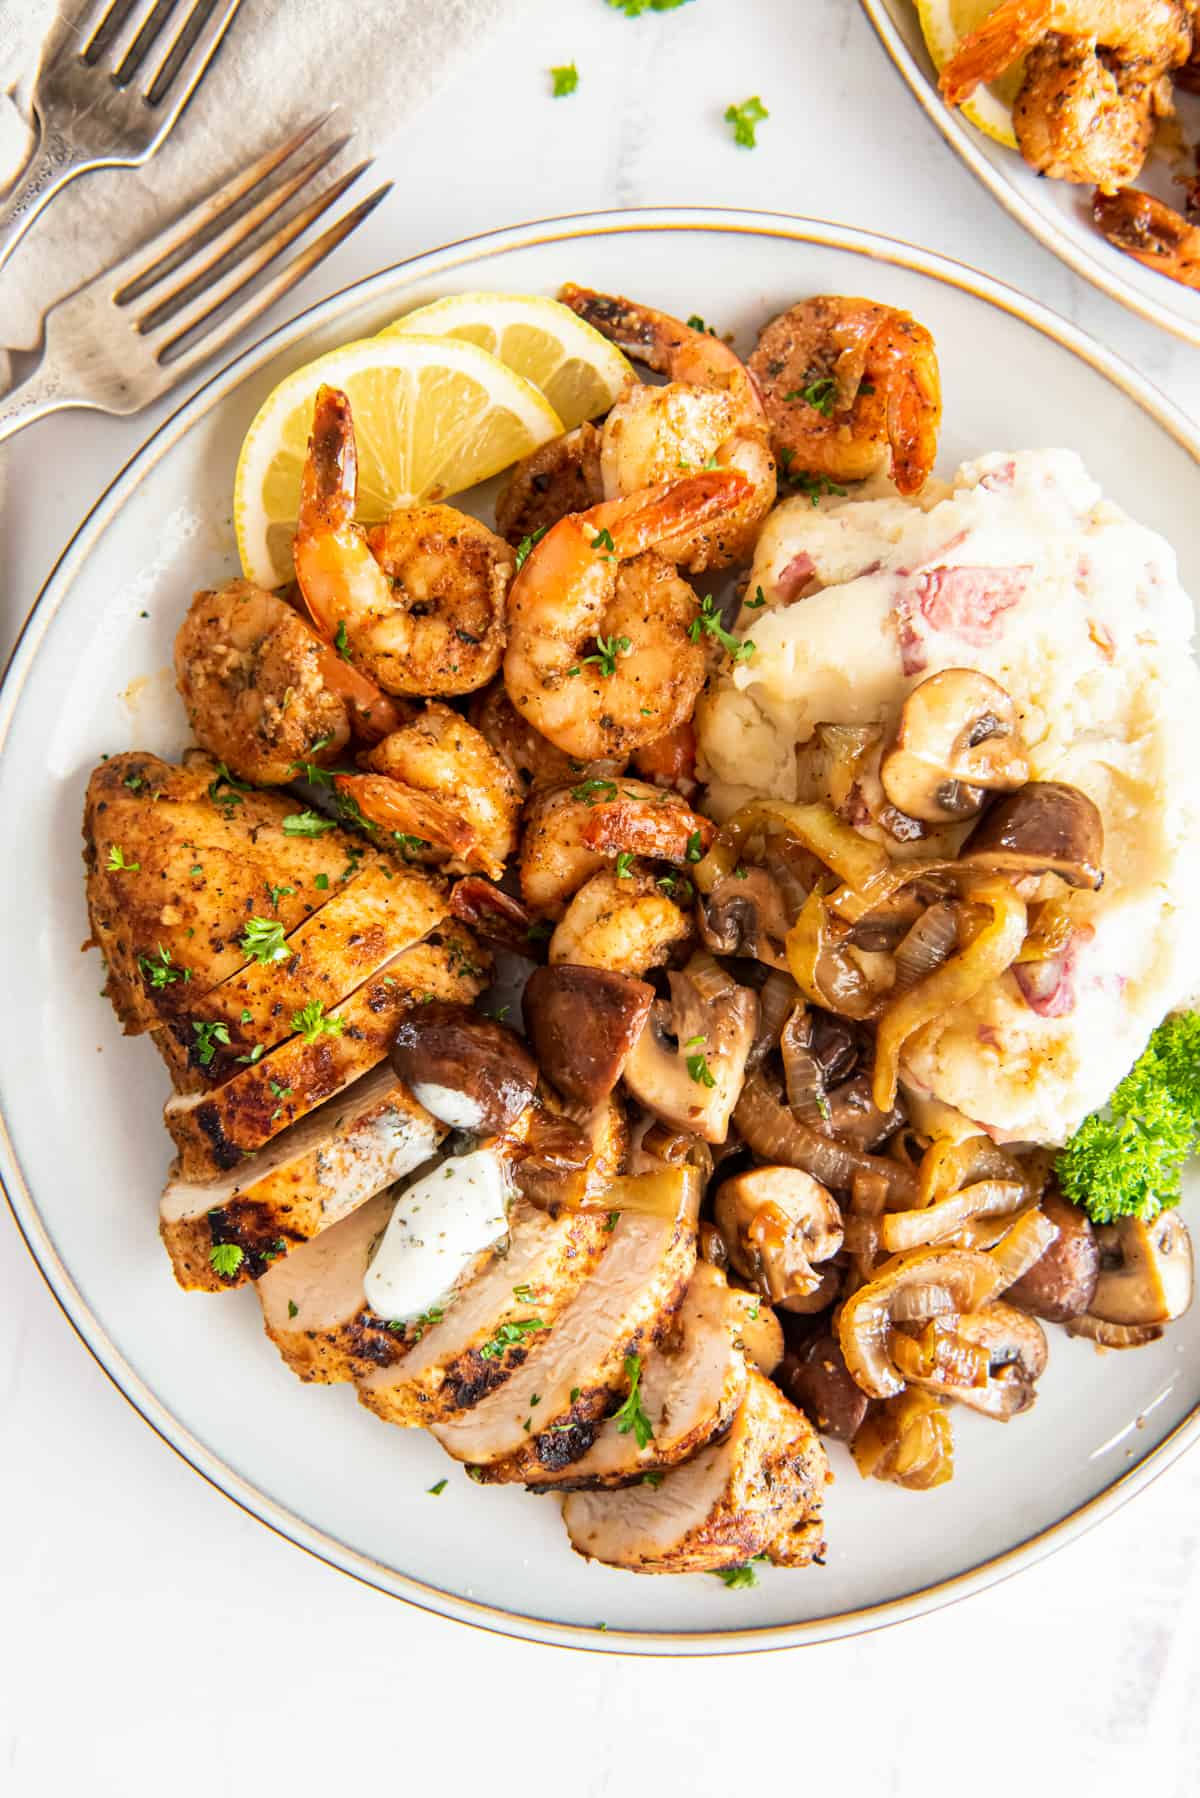 applebees bourbon street chicken and shrimp with mashed potatoes and mushrooms on a white plate.